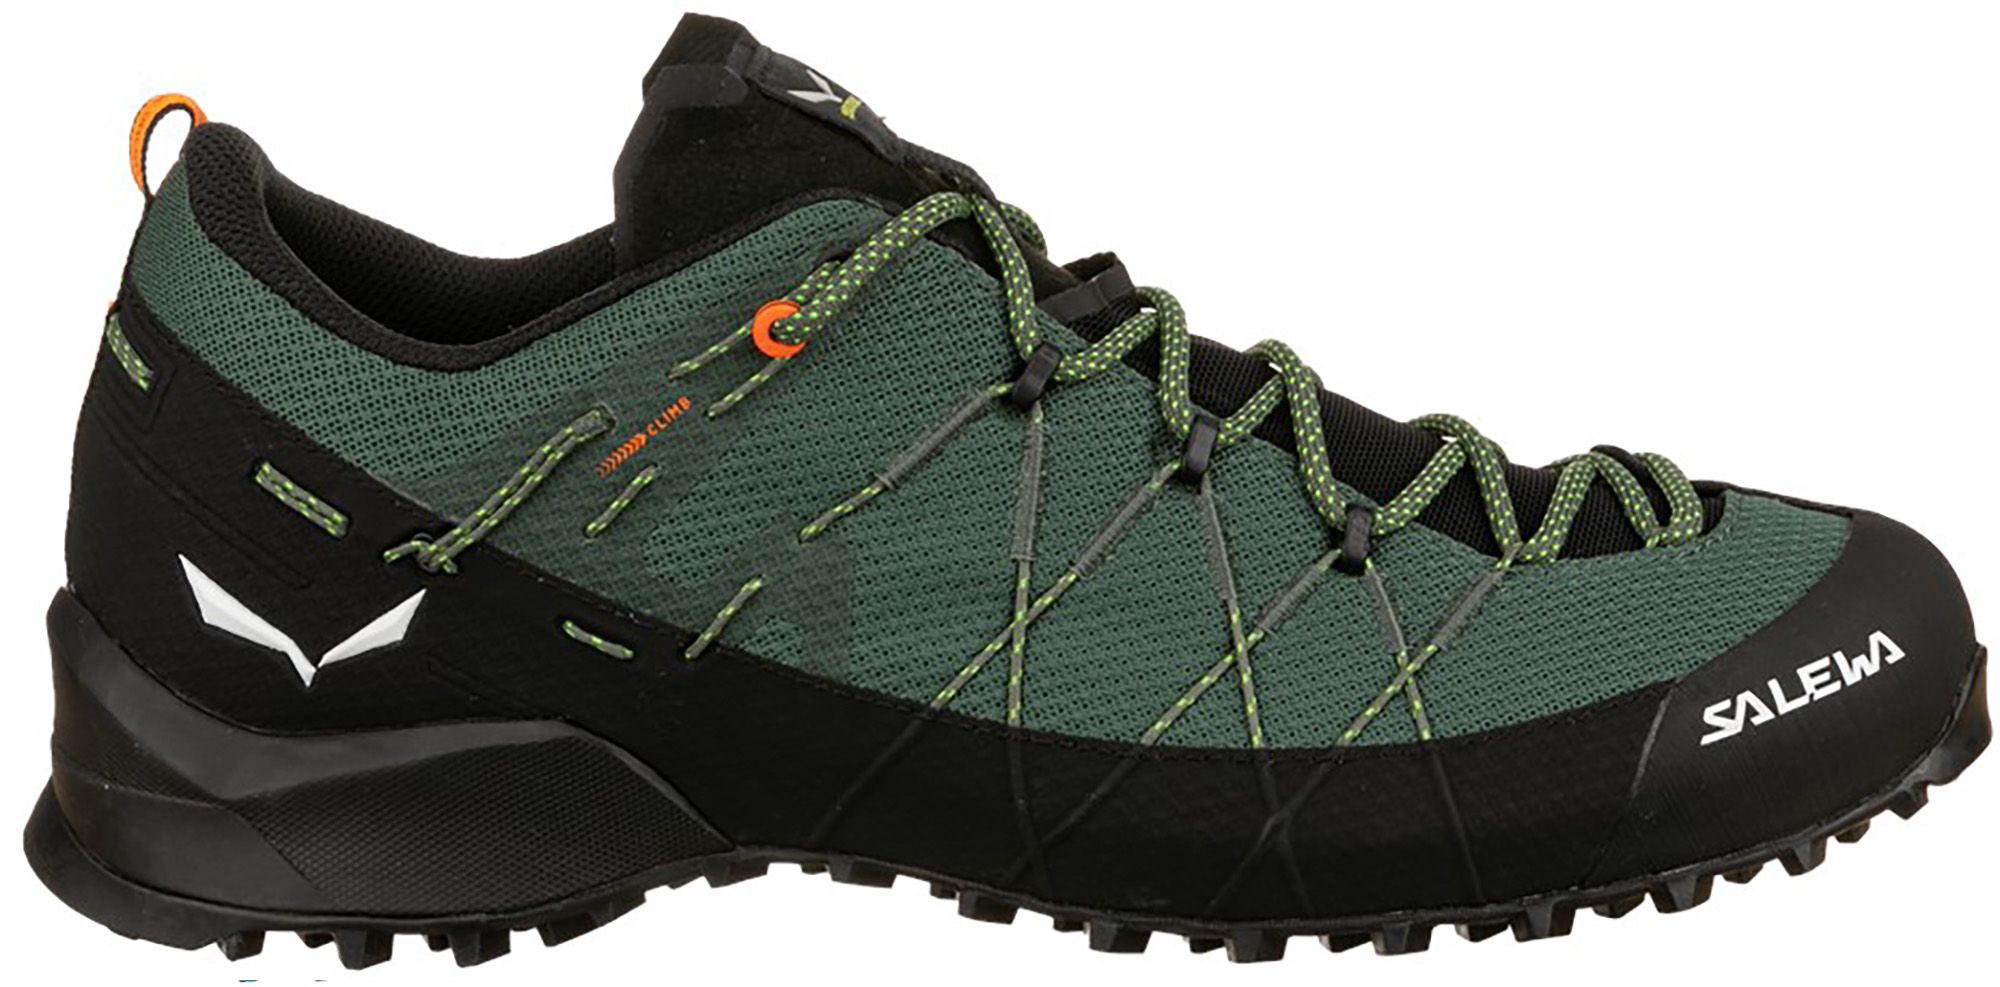 Photos - Trekking Shoes Salewa Men's Wildfire 2 Approach Shoes, Size 11, Black/Green 22IYPMMWLDFR2 